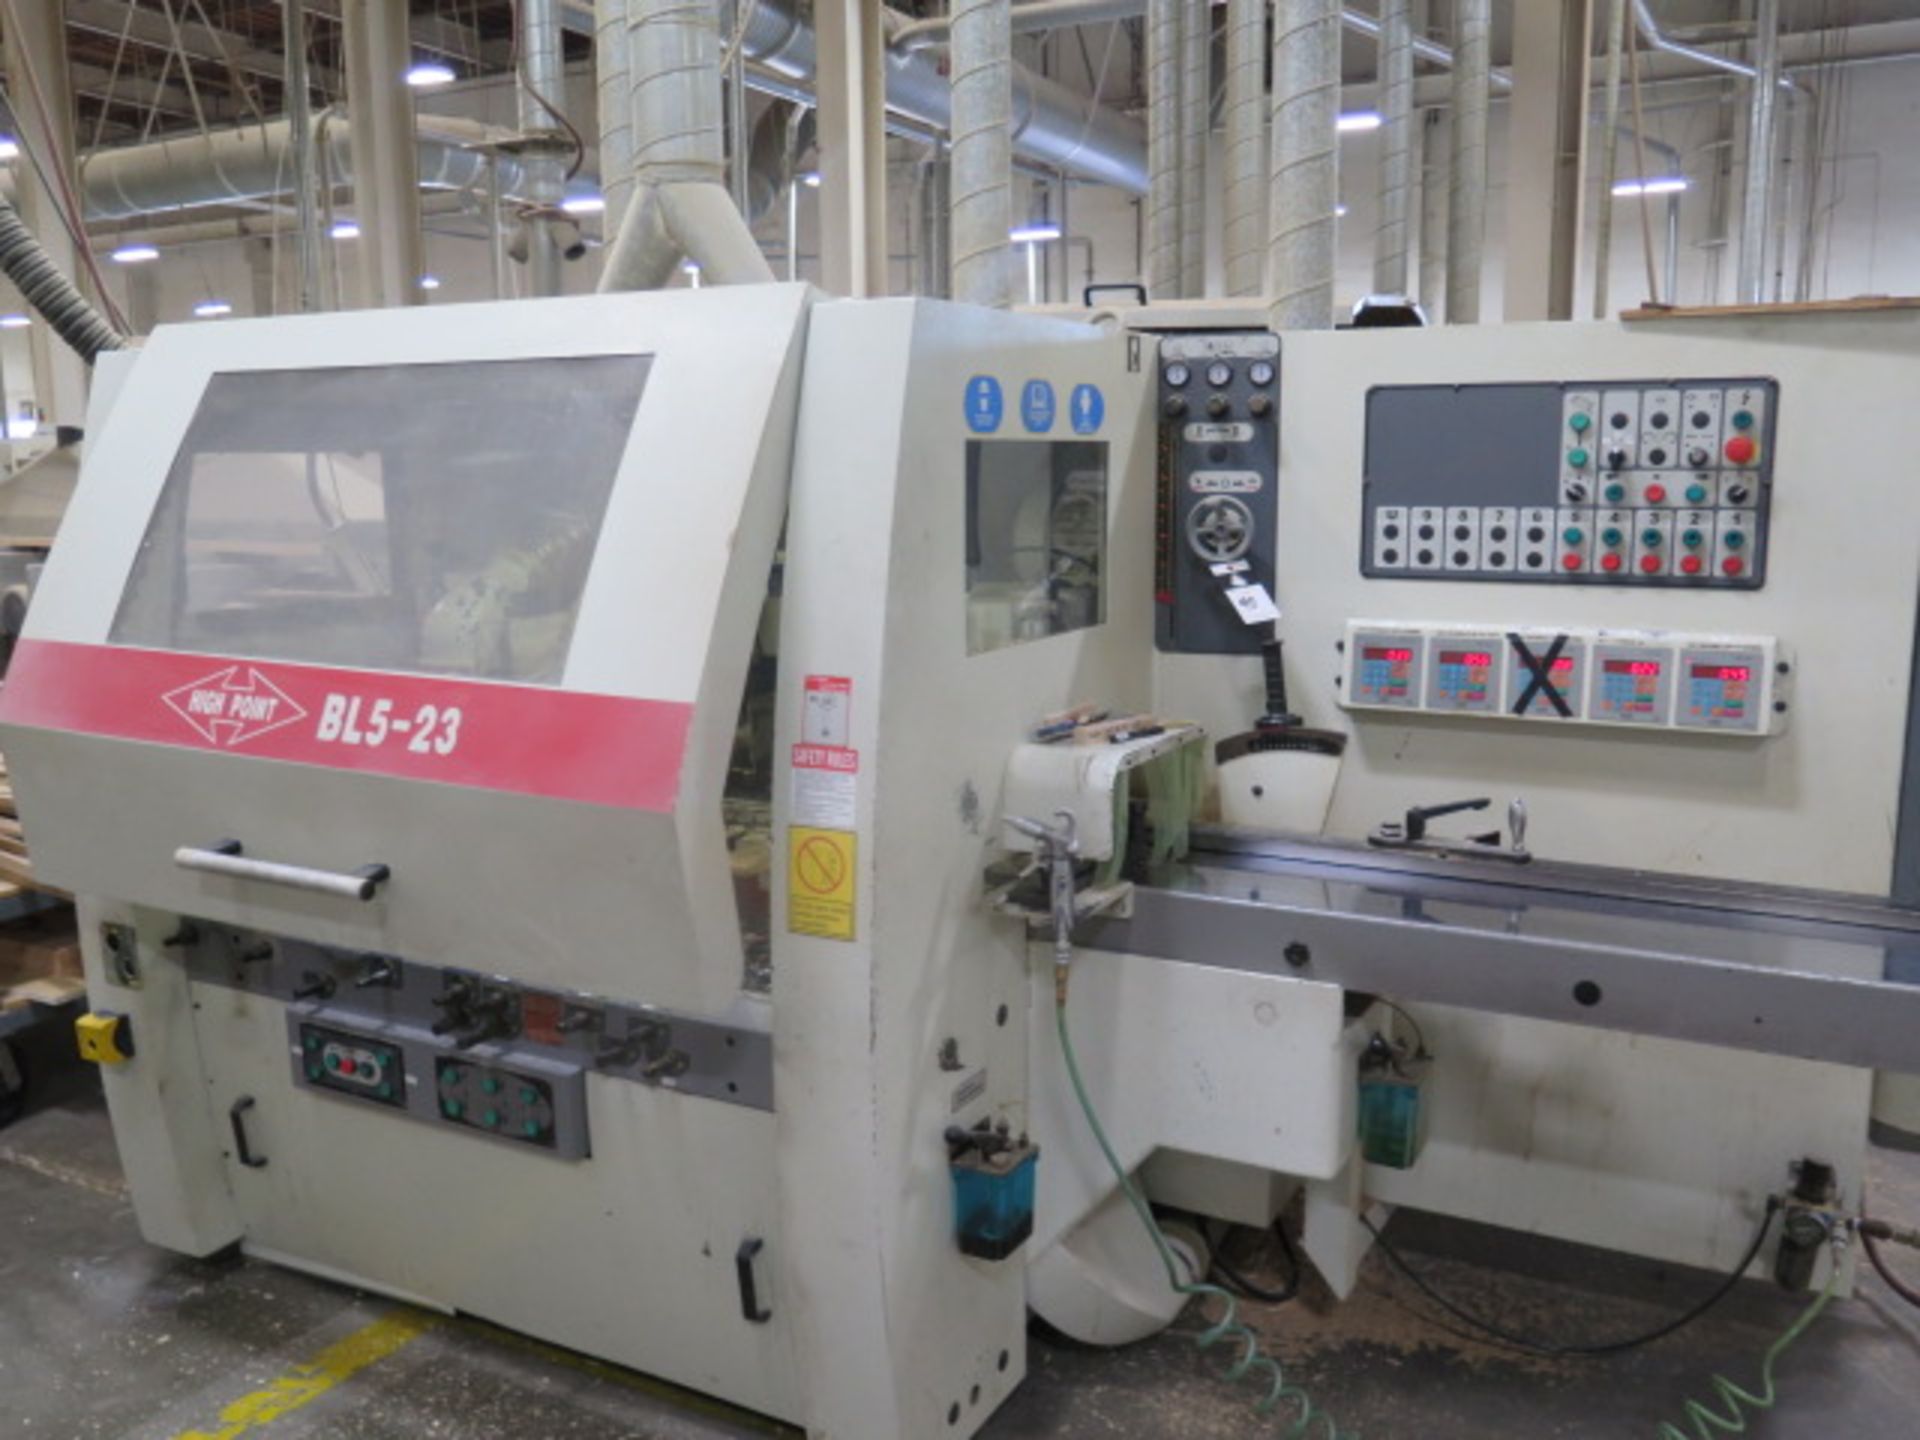 2006 High Point BL5-23 Moulding Machine s/n 06A1060 w/ Controls (SOLD AS-IS - NO WARRANTY) - Image 2 of 15